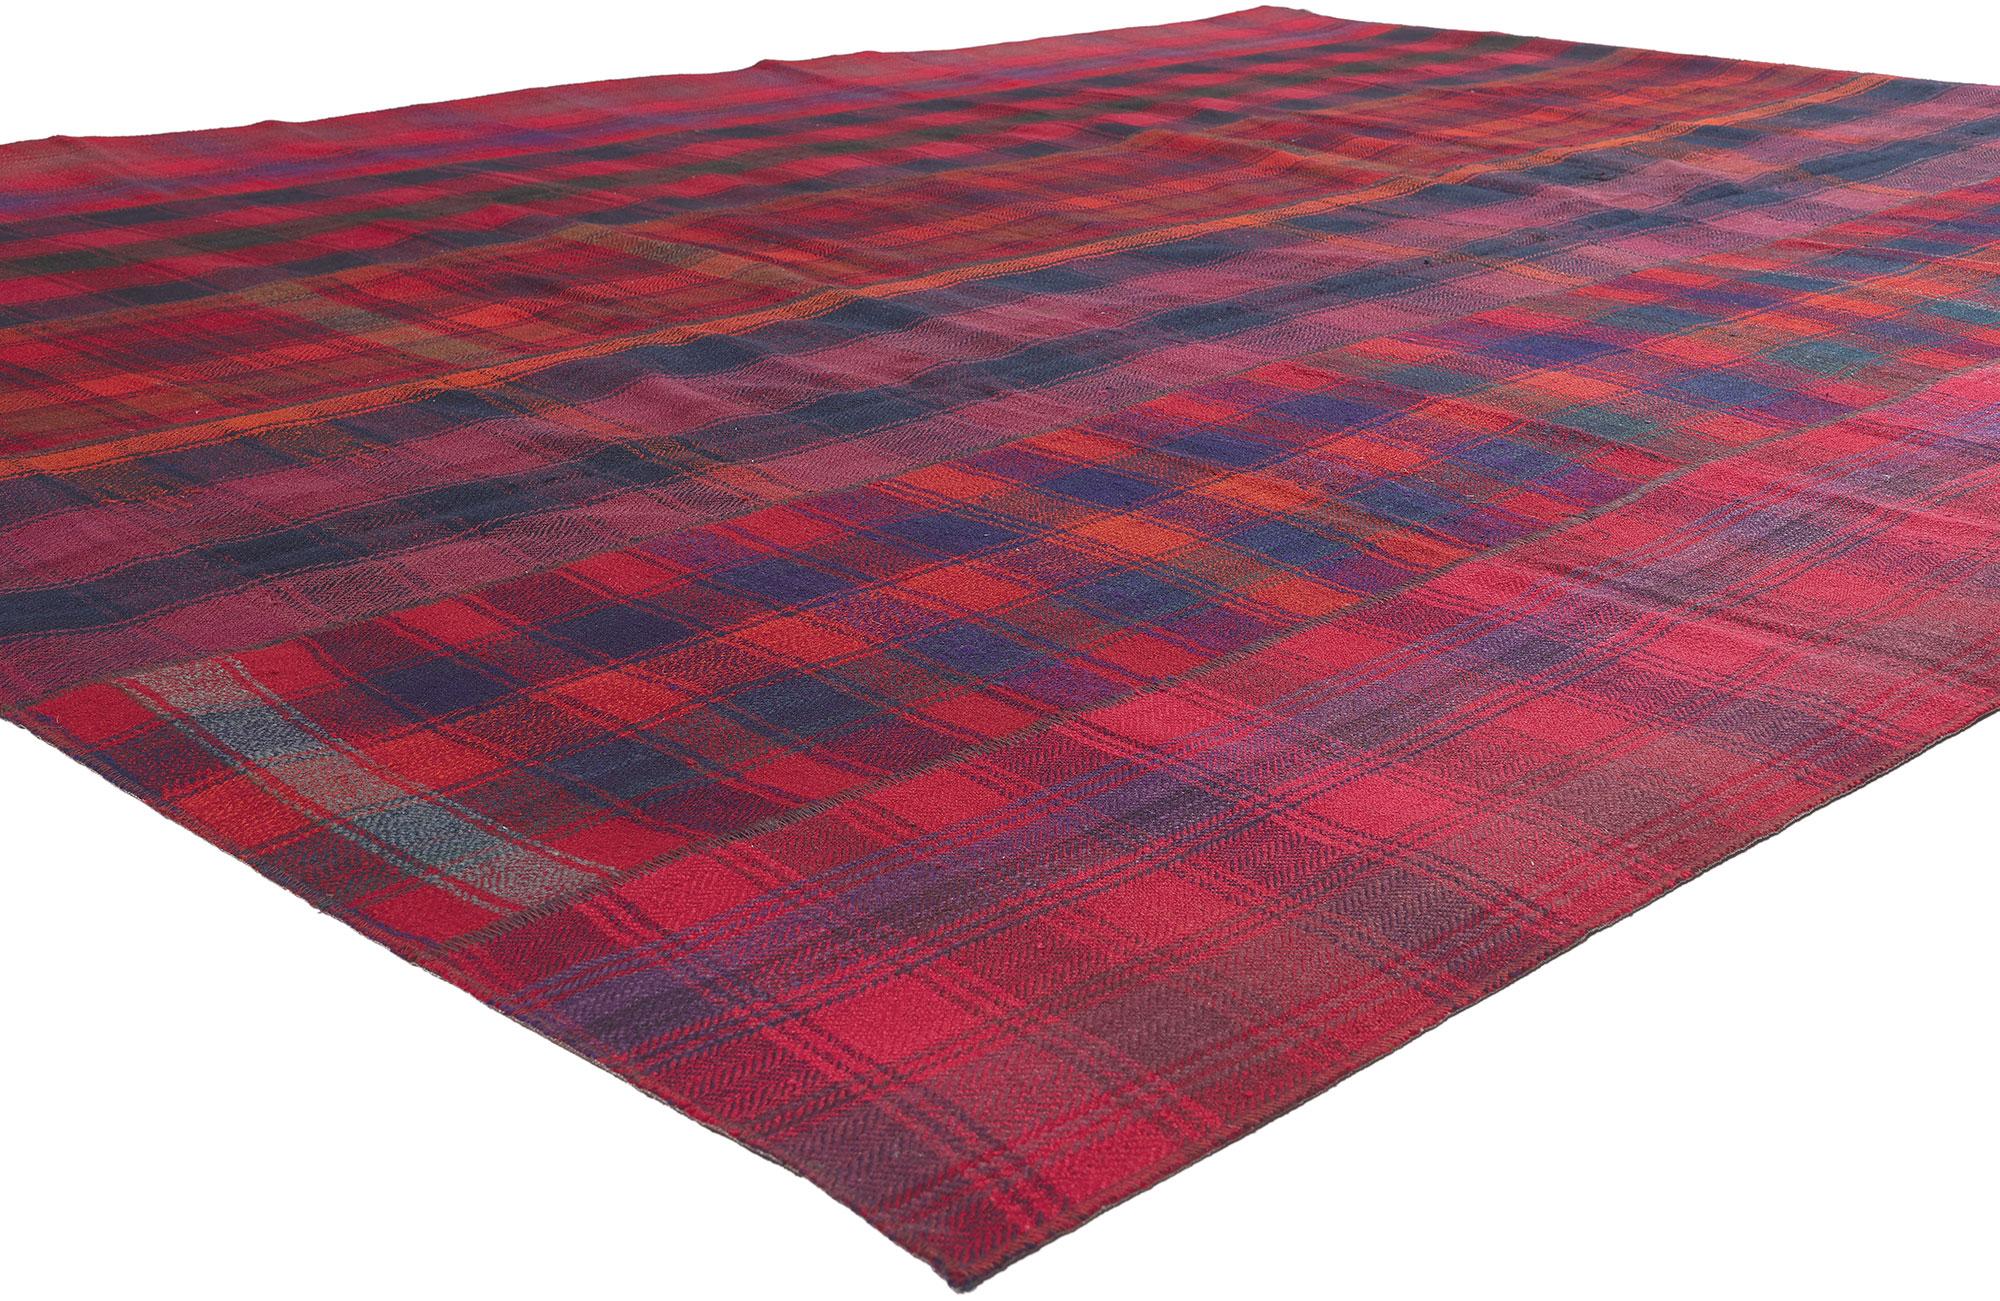 60791 Vintage Tartan Plaid Rug, 08'05 x 12'00. Radiating timeless tartan allure and embodying the refined elegance synonymous with Ivy League interiors, this handwoven vintage plaid rug serves as a captivating expression of woven beauty. The